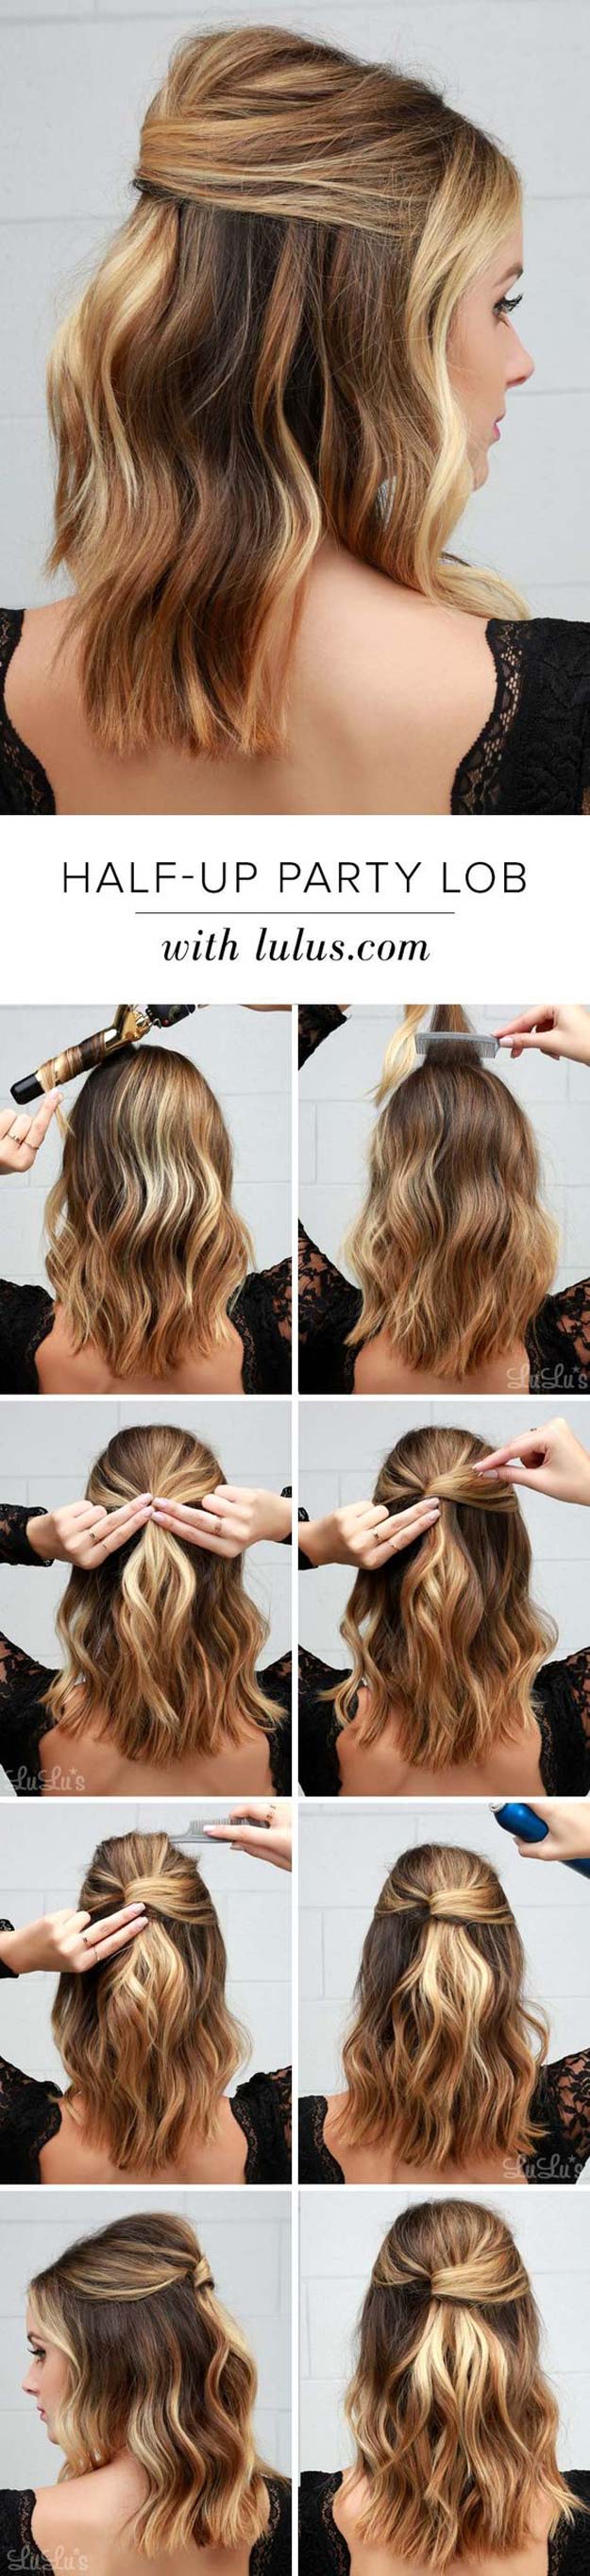 Cool and Easy DIY Hairstyles - Half Party Lob - Quick and Easy Ideas for Back to School Styles for Medium, Short and Long Hair - Fun Tips and Best Step by Step Tutorials for Teens, Prom, Weddings, Special Occasions and Work. Up dos, Braids, Top Knots and Buns, Super Summer Looks #hairstyles #hair #teens #easyhairstyles #diy #beauty